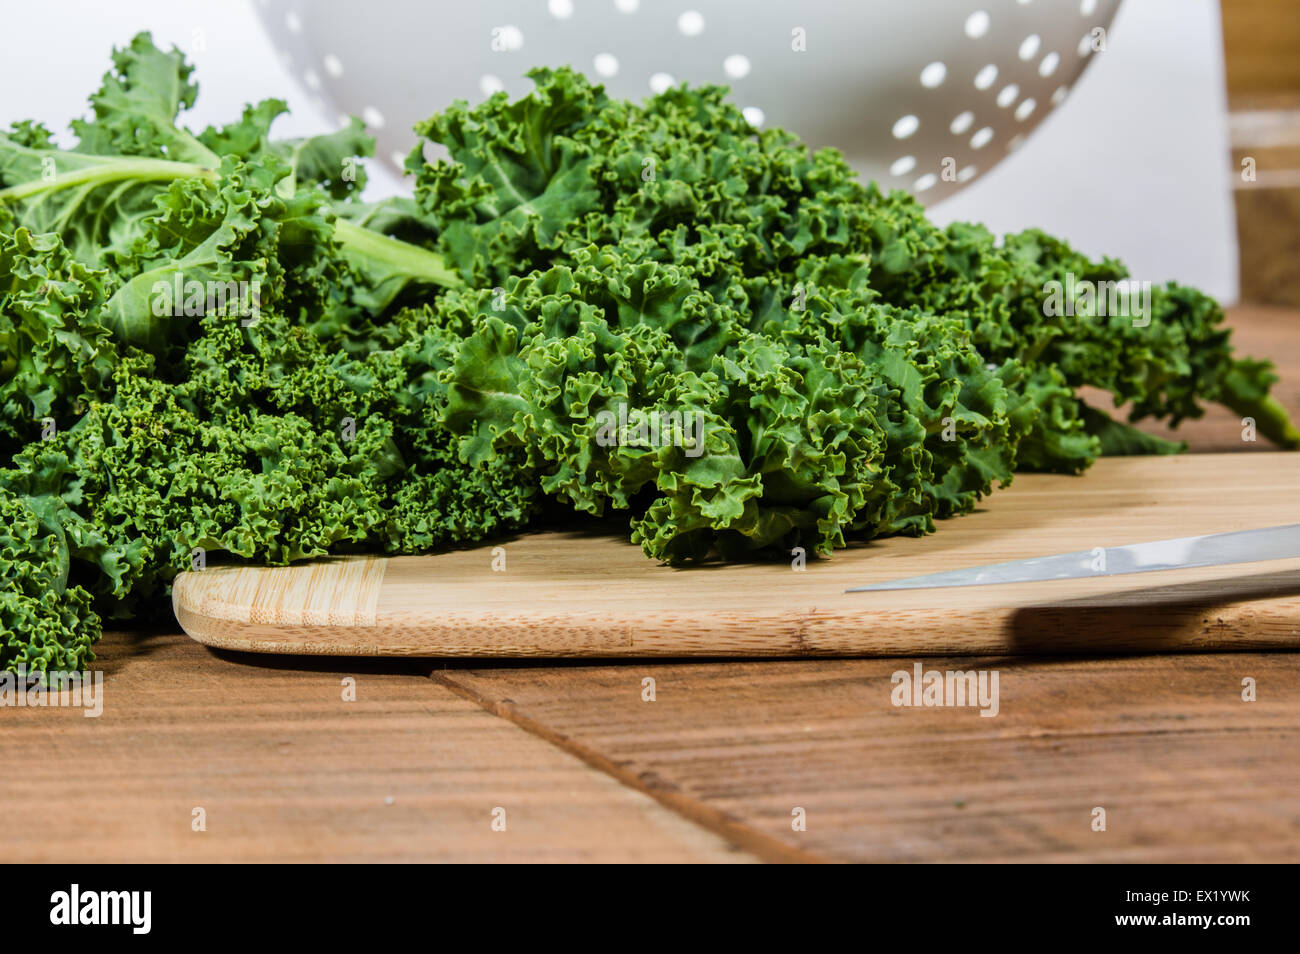 Green curly kale and chef knife Stock Photo